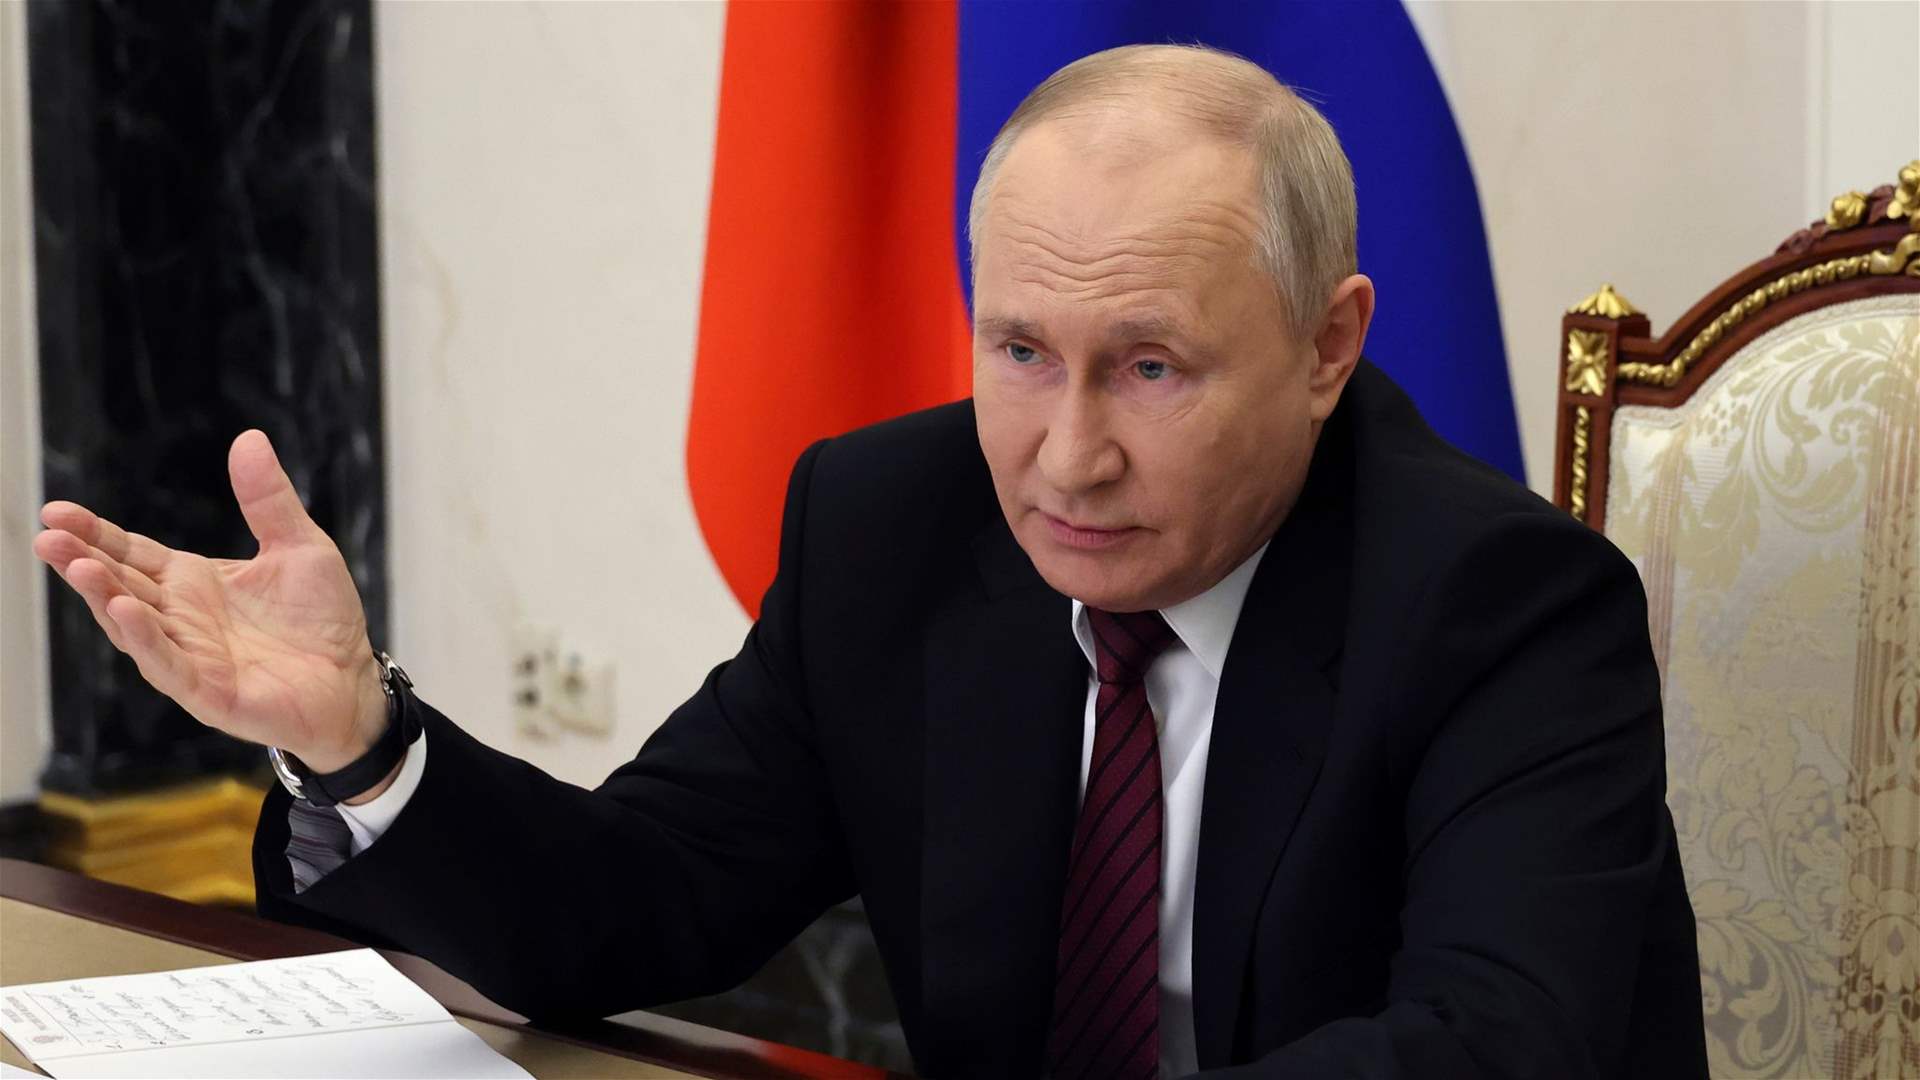 Putin says that the United States is behind the deadly chaos in the Middle East